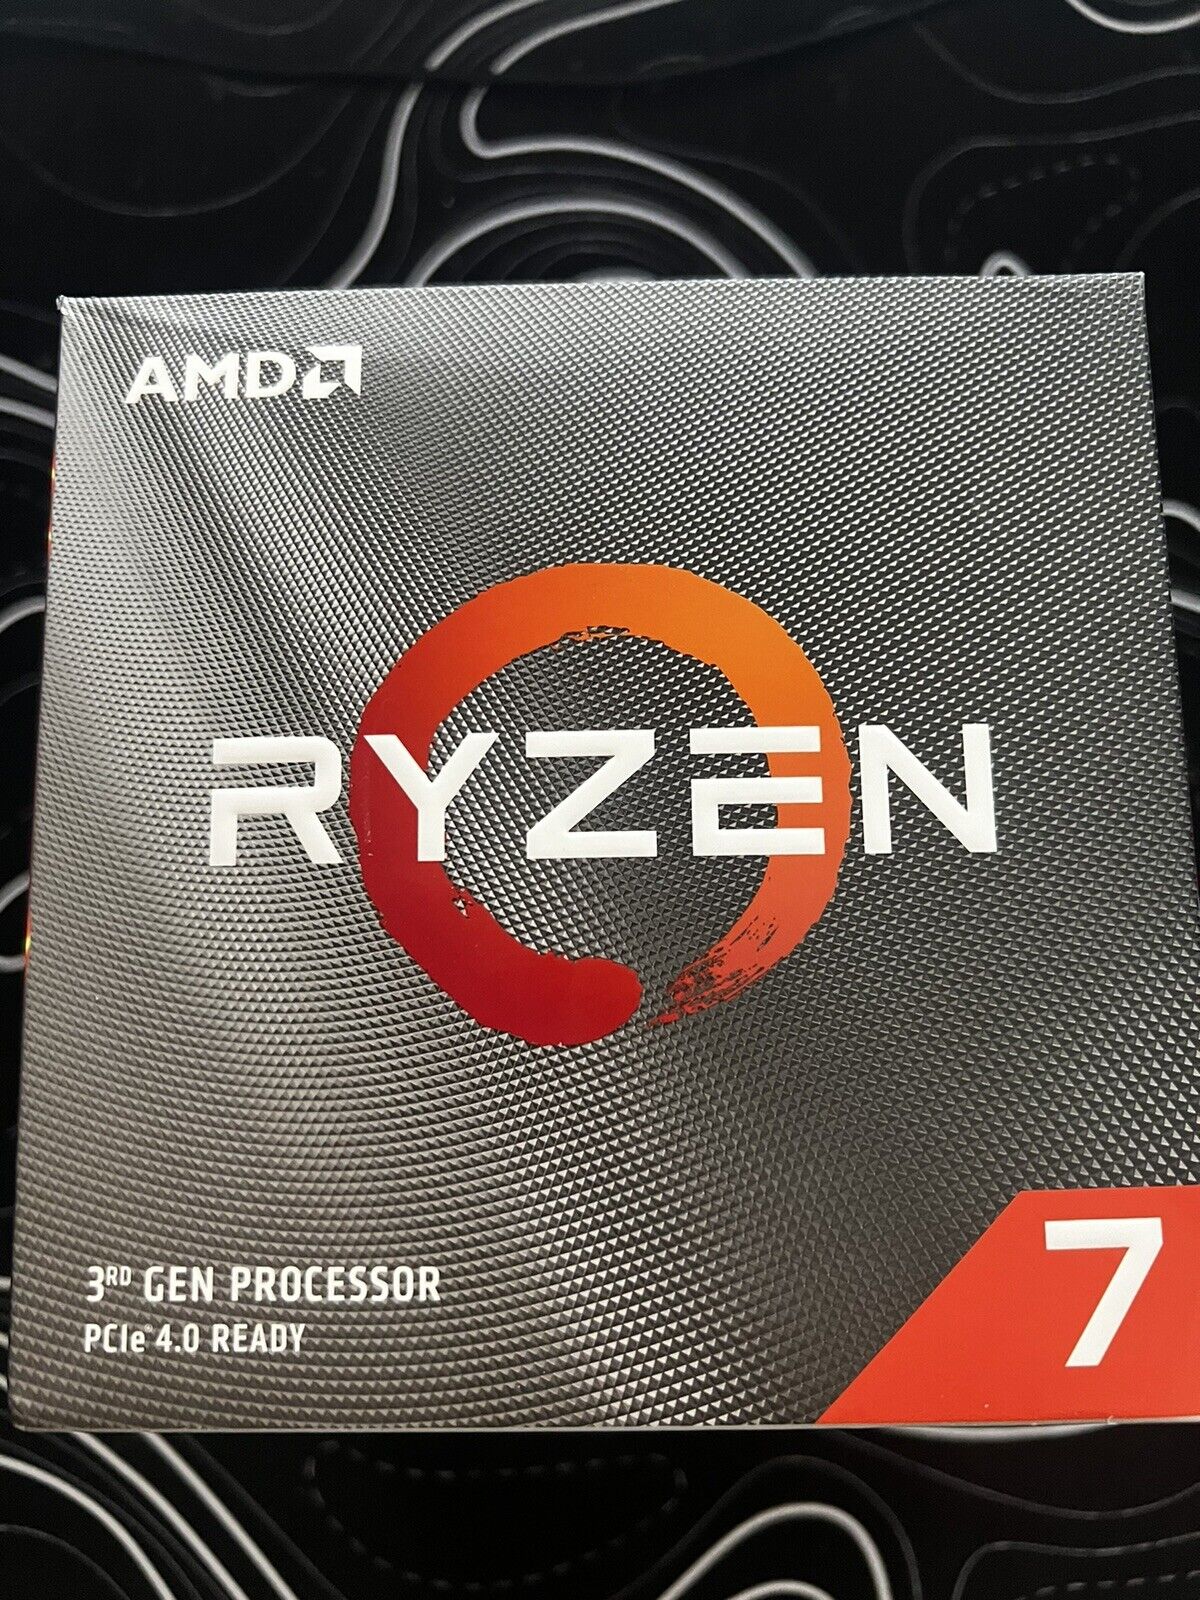 AMD Ryzen 7 3700X (3.6GHz, 8 Cores, Socket AM4)  with cooler USED